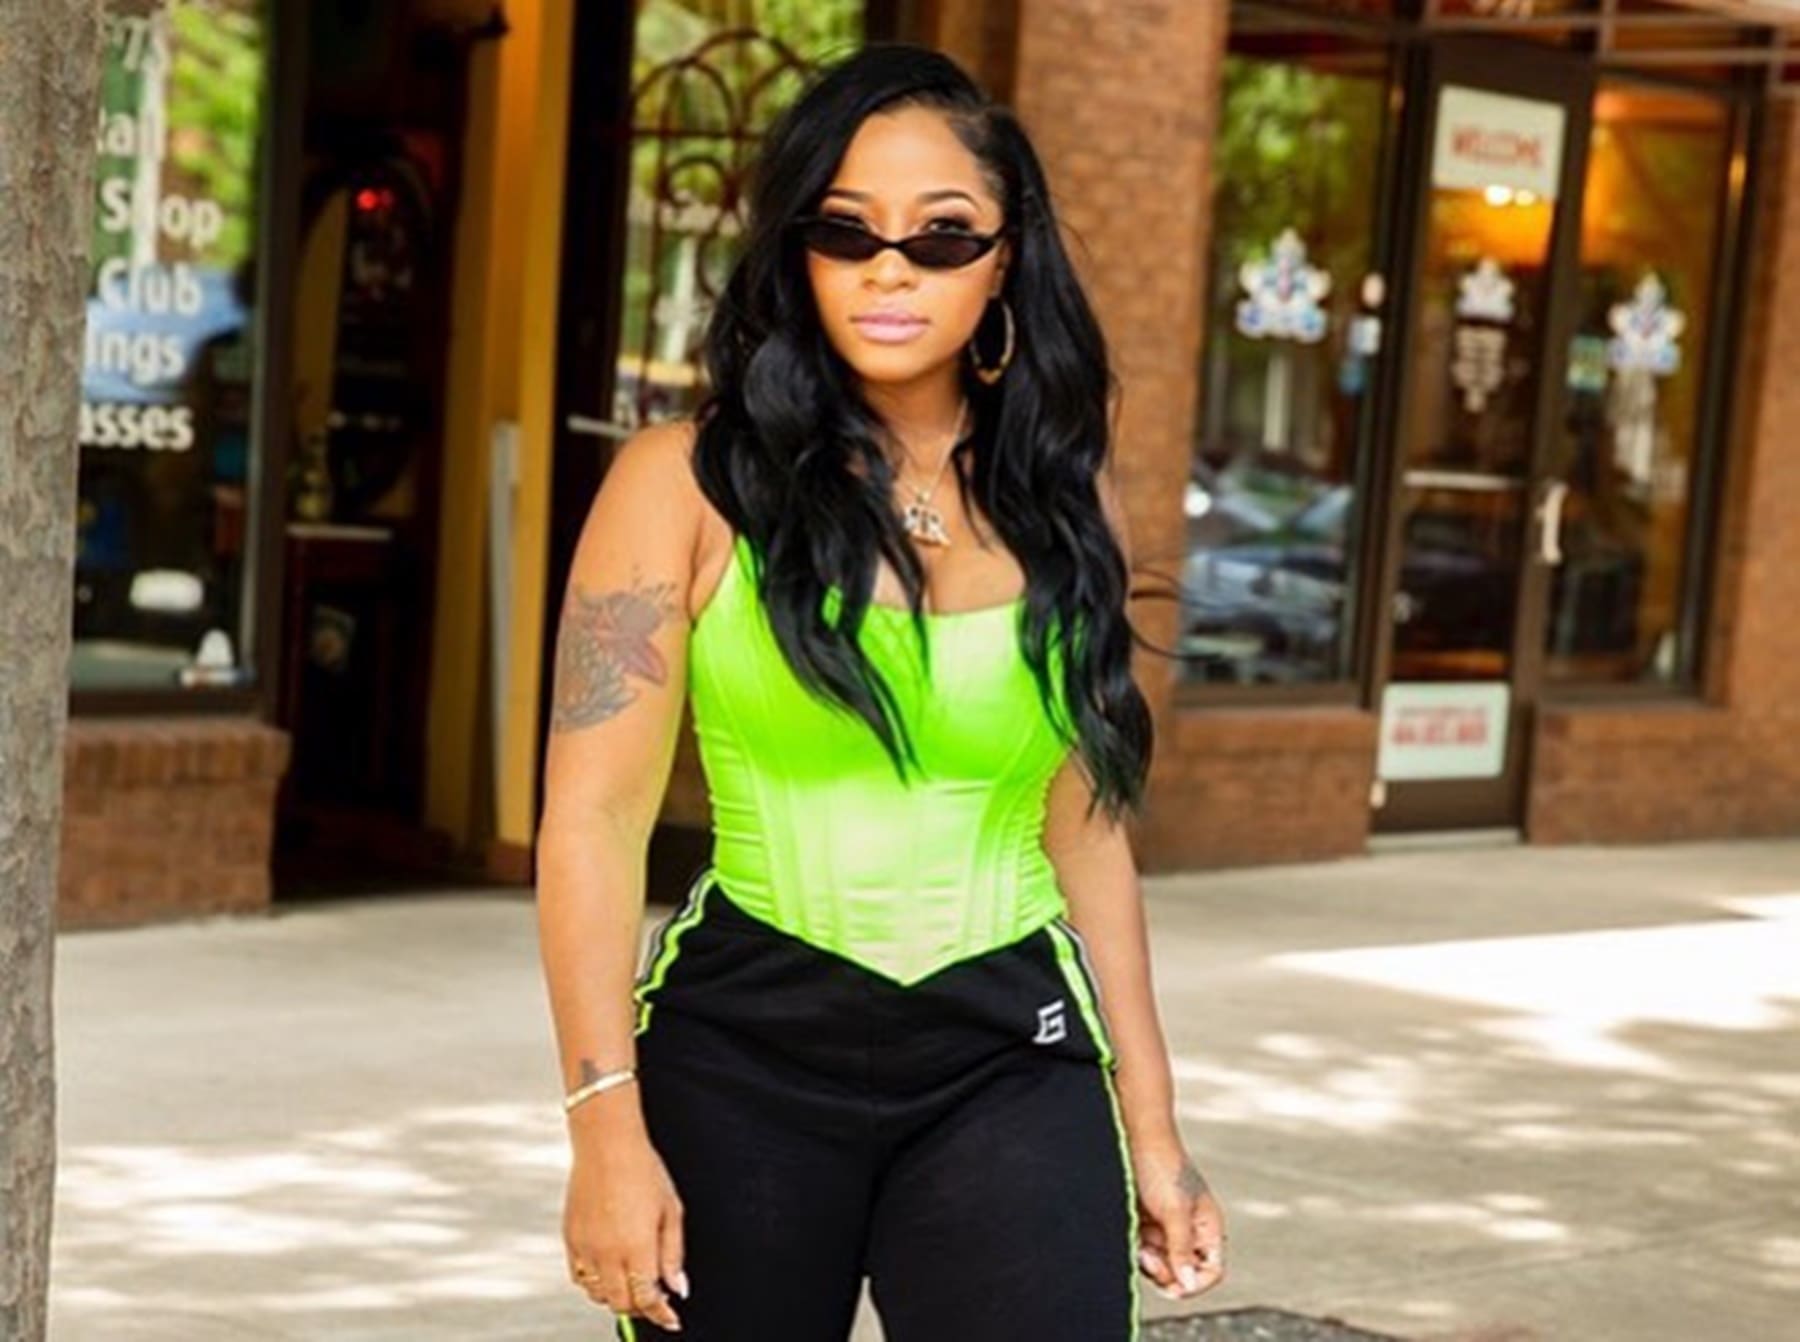 Toya Wright Shares Footage From The Most Recent 'Weight No More' Event